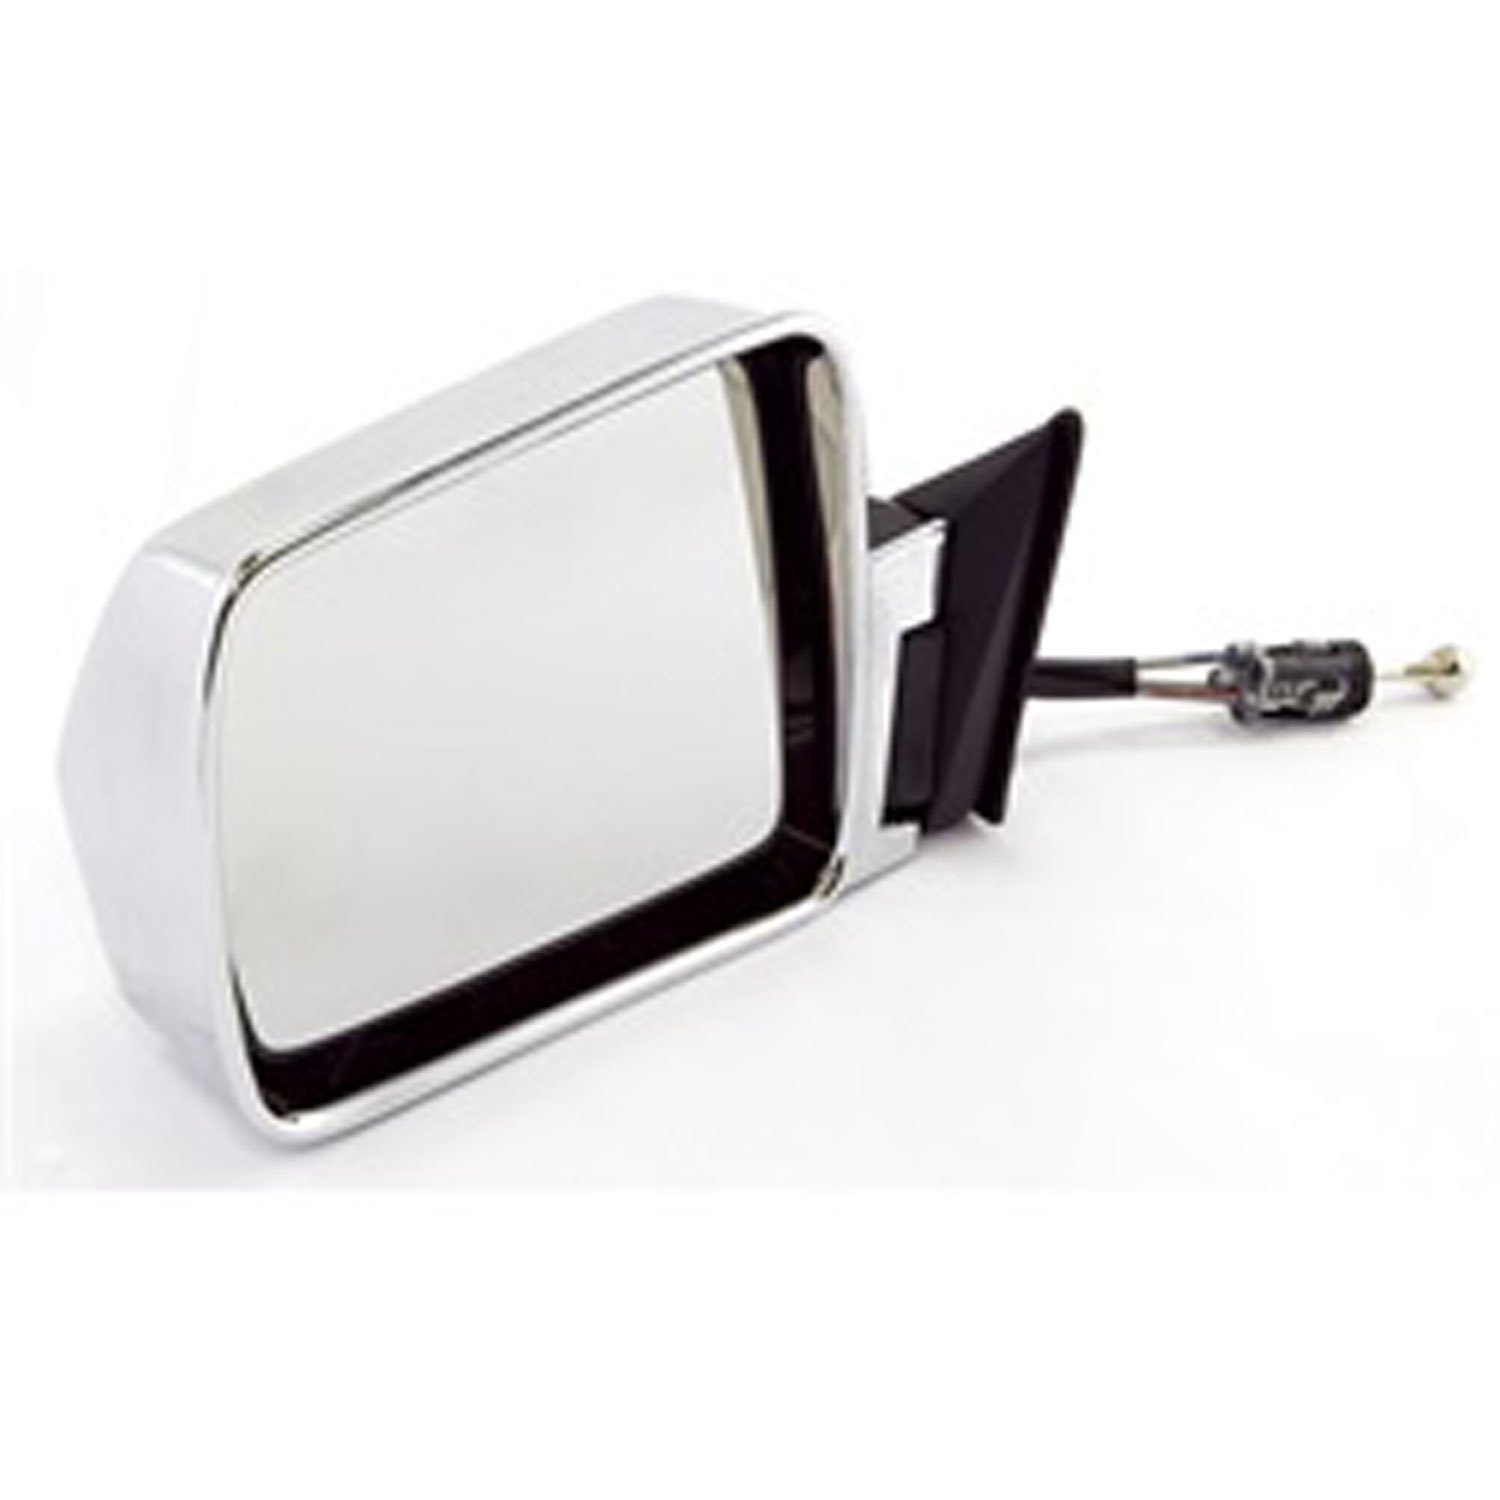 This chrome folding door mirror from Omix-ADA fits the left door on 84-96 Jeep Cherokee XJ. Connects